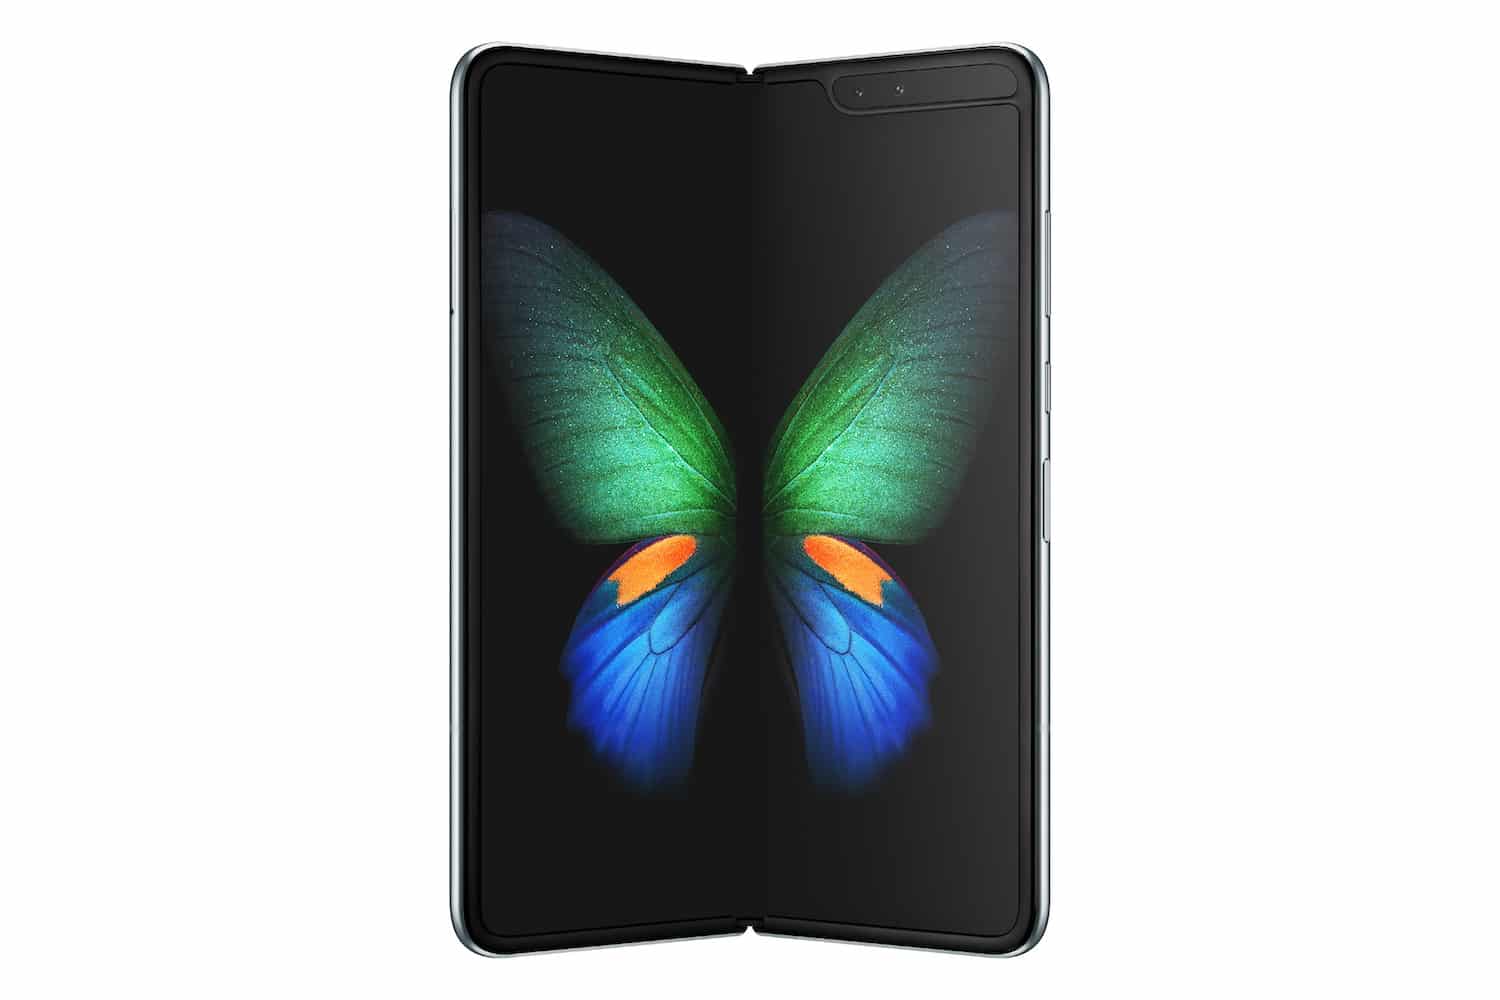 Samsung Baselines Foldable Smartphones with the Galaxy Fold